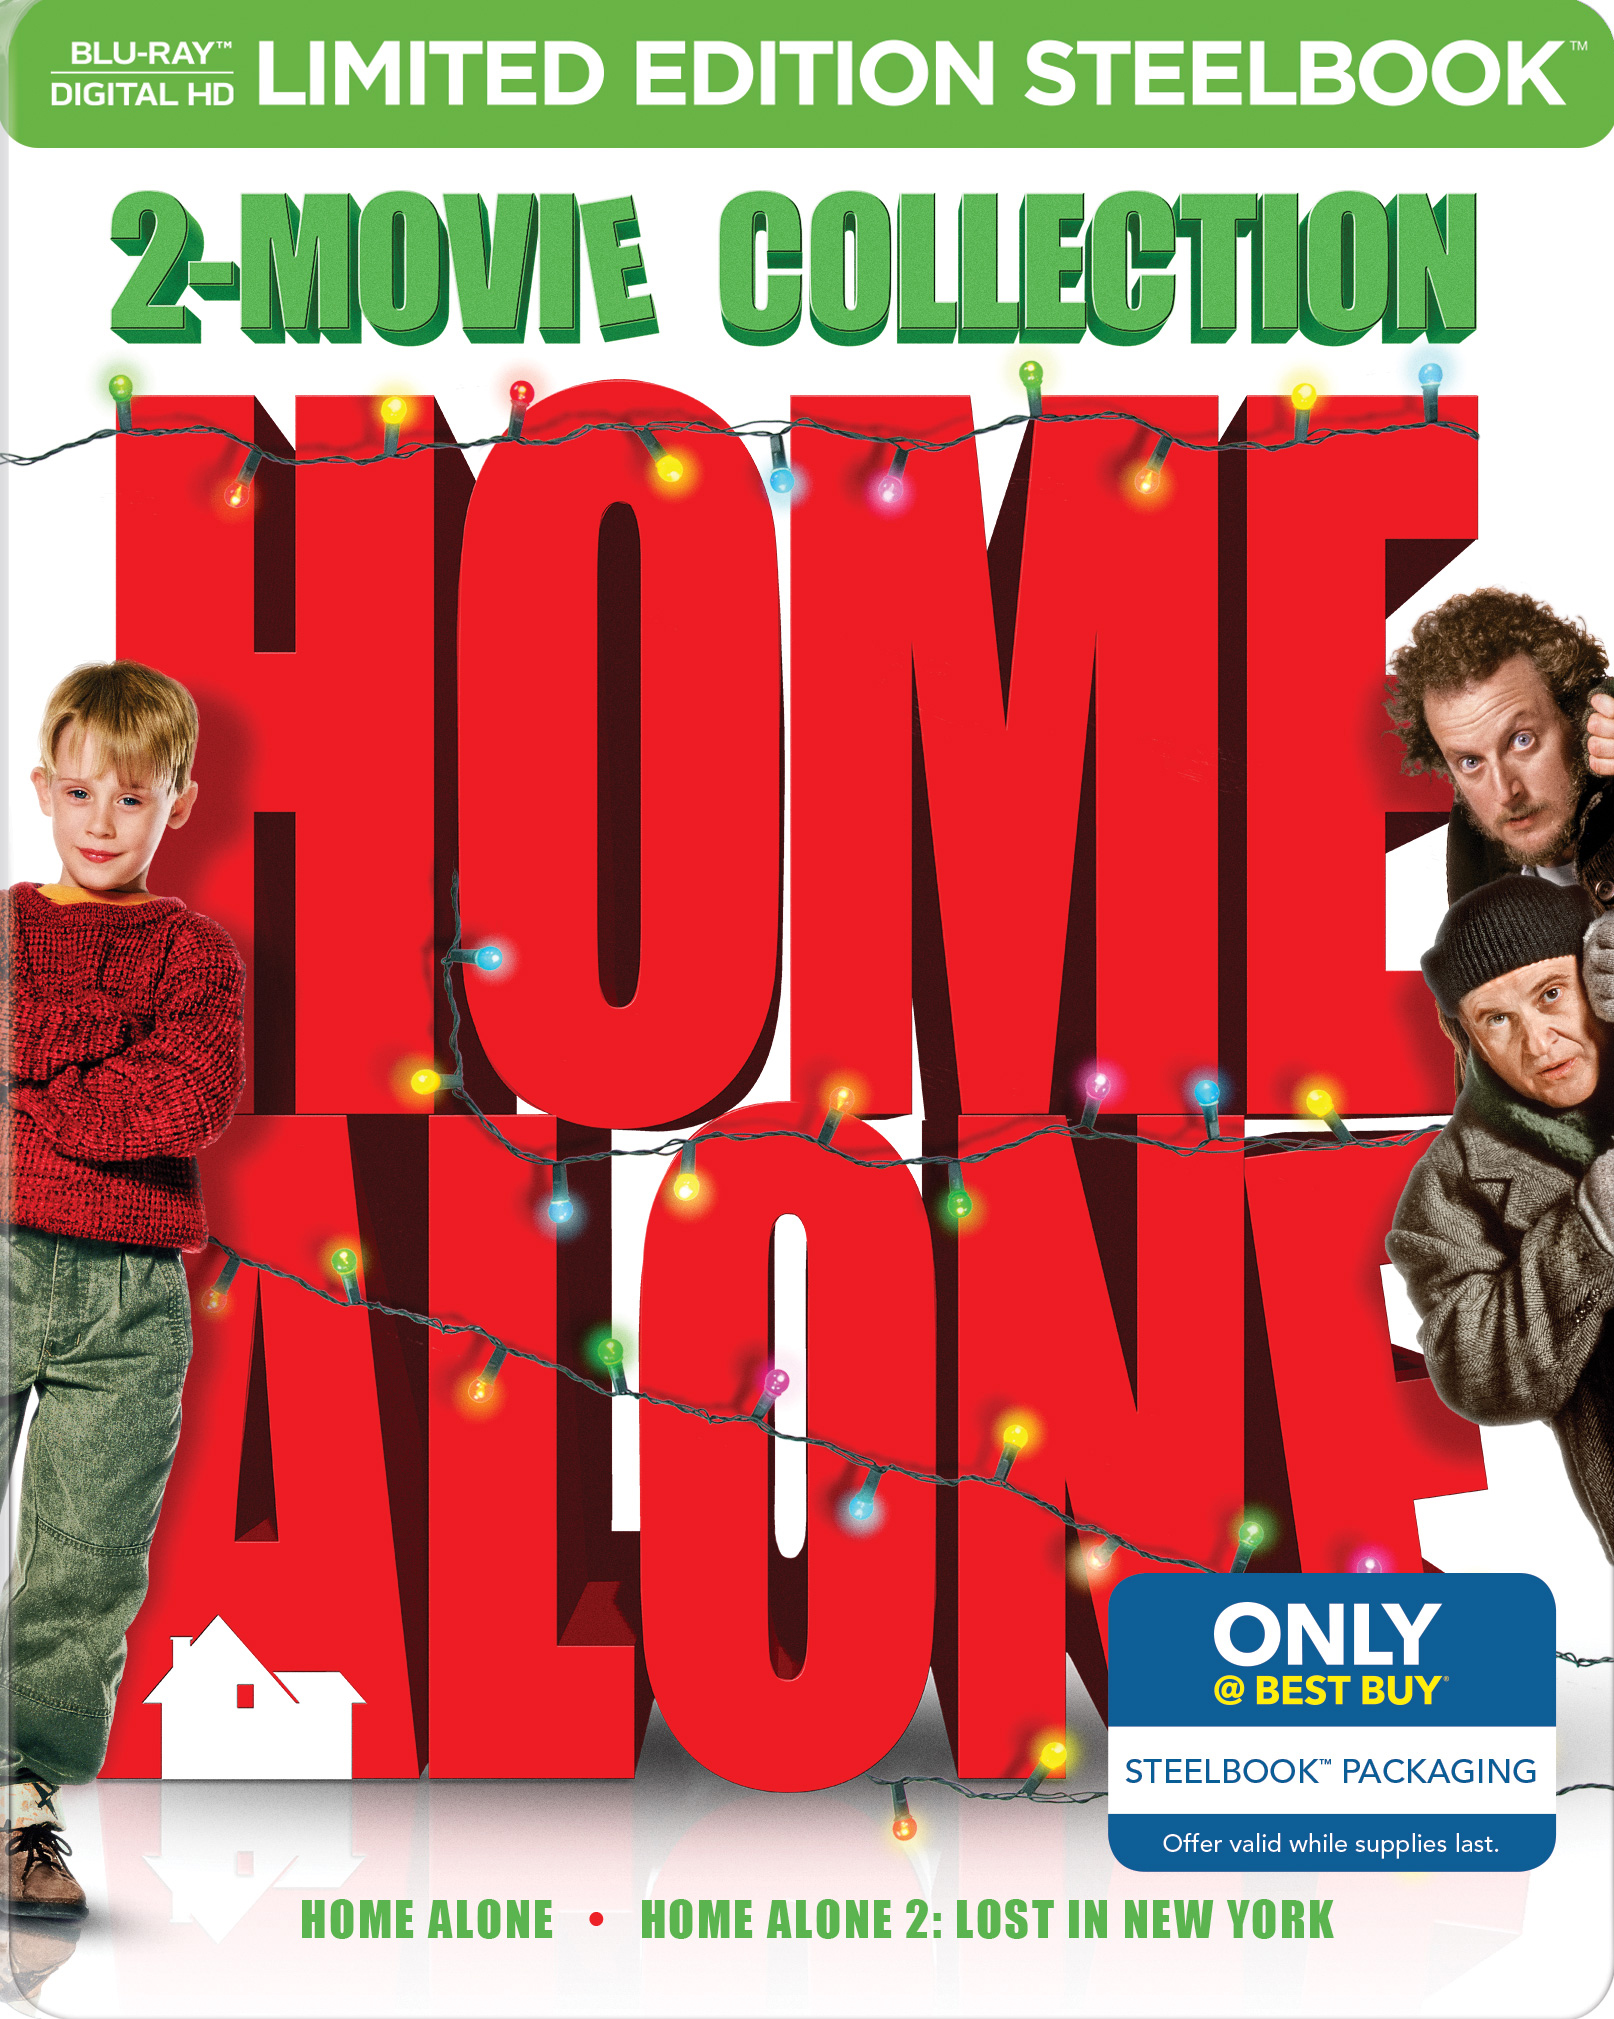 Home Alone: 2-Movie Collection [Blu-ray] [2 Discs] - Best Buy